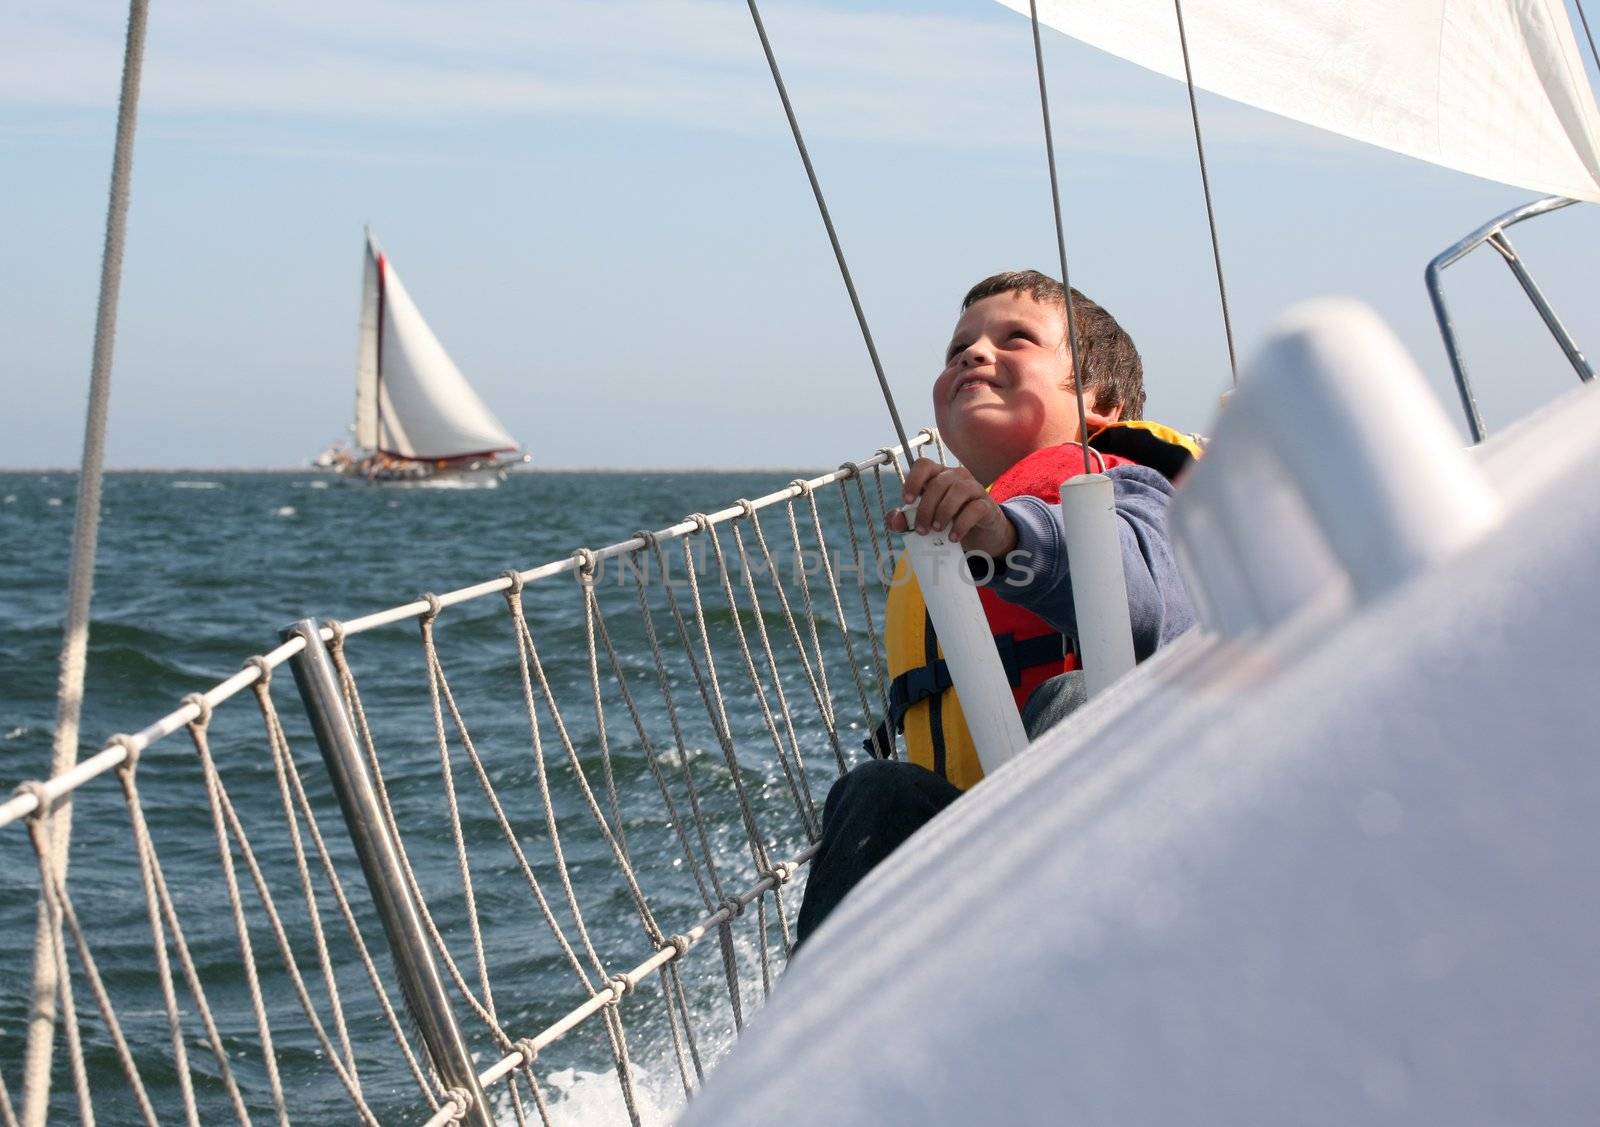 Young boy with ocean spray on him showing his joy of sailing